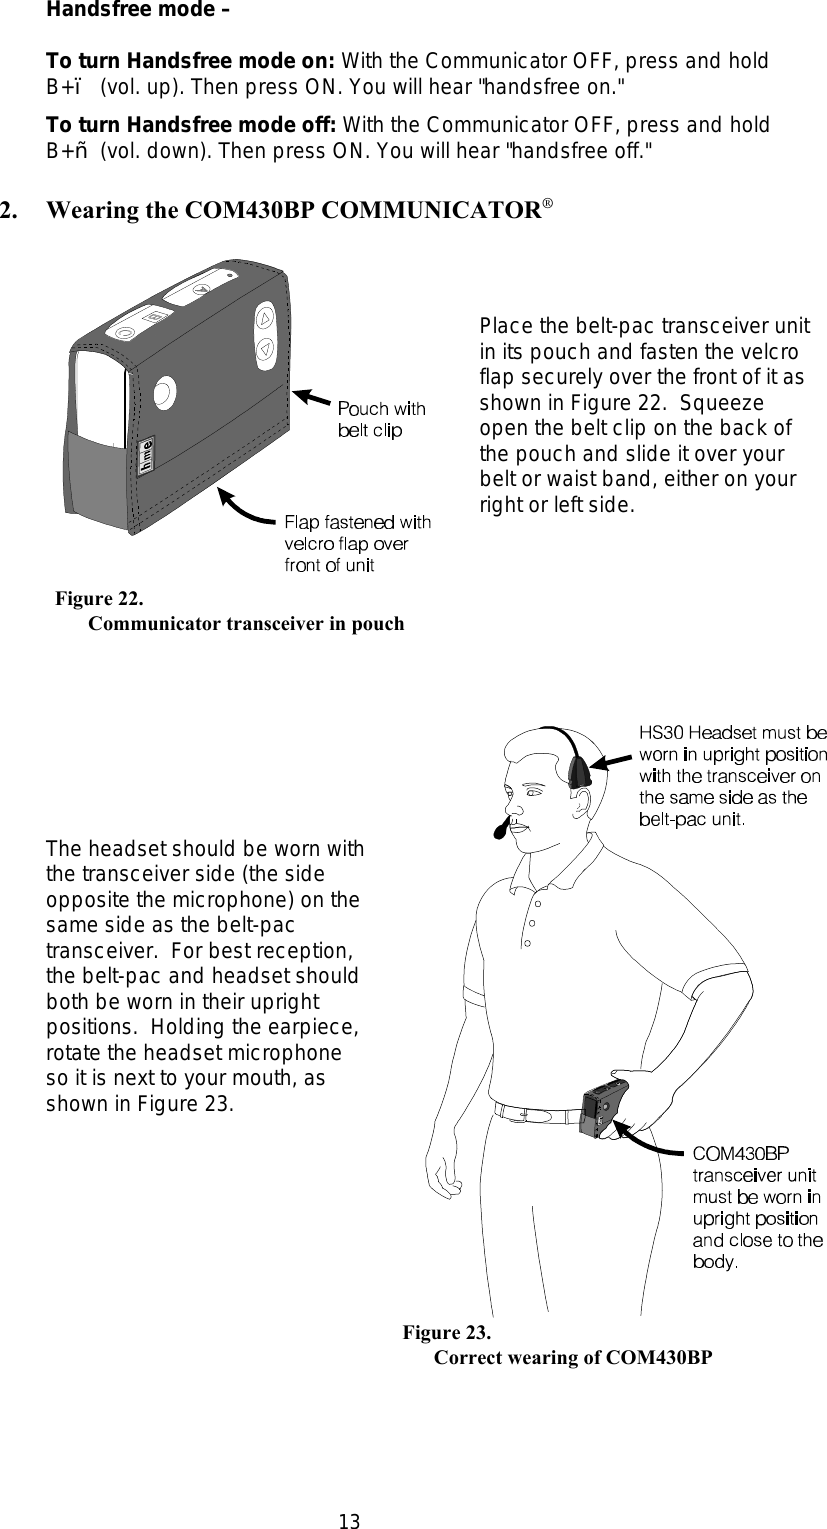 13   Figure 22.Communicator transceiver in pouch     Figure 23.           Correct wearing of COM430BPHandsfree mode –To turn Handsfree mode on: With the Communicator OFF, press and holdB+• (vol. up). Then press ON. You will hear &quot;handsfree on.&quot;To turn Handsfree mode off: With the Communicator OFF, press and holdB+– (vol. down). Then press ON. You will hear &quot;handsfree off.&quot;2. Wearing the COM430BP COMMUNICATOR®Place the belt-pac transceiver unitin its pouch and fasten the velcroflap securely over the front of it asshown in Figure 22.  Squeezeopen the belt clip on the back ofthe pouch and slide it over yourbelt or waist band, either on yourright or left side.  The headset should be worn withthe transceiver side (the sideopposite the microphone) on thesame side as the belt-pactransceiver.  For best reception,the belt-pac and headset shouldboth be worn in their uprightpositions.  Holding the earpiece,rotate the headset microphoneso it is next to your mouth, asshown in Figure 23.  